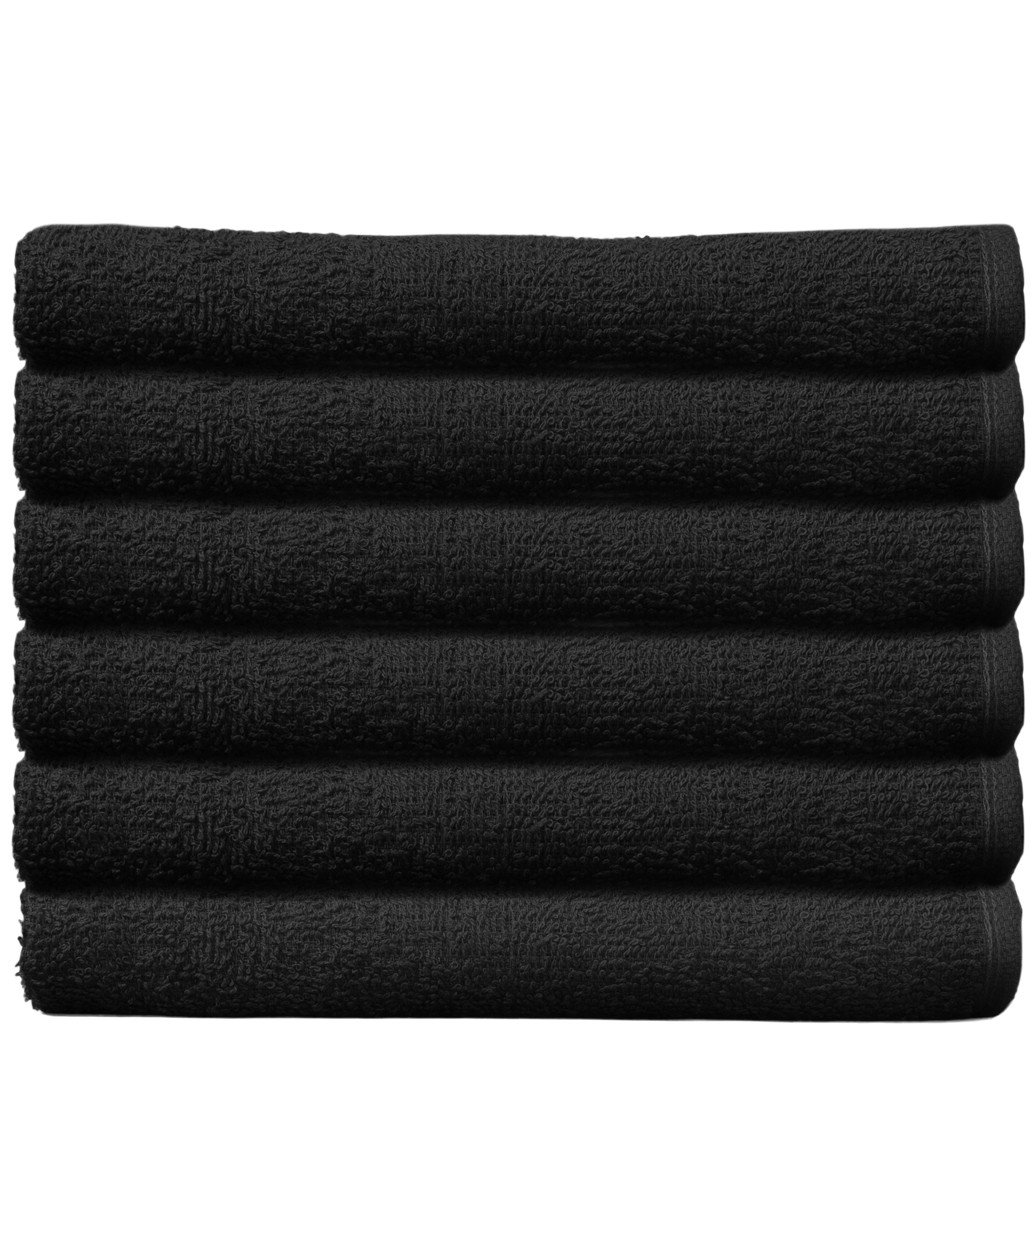 12 Pack Black Towels from Buy-Rite Beauty